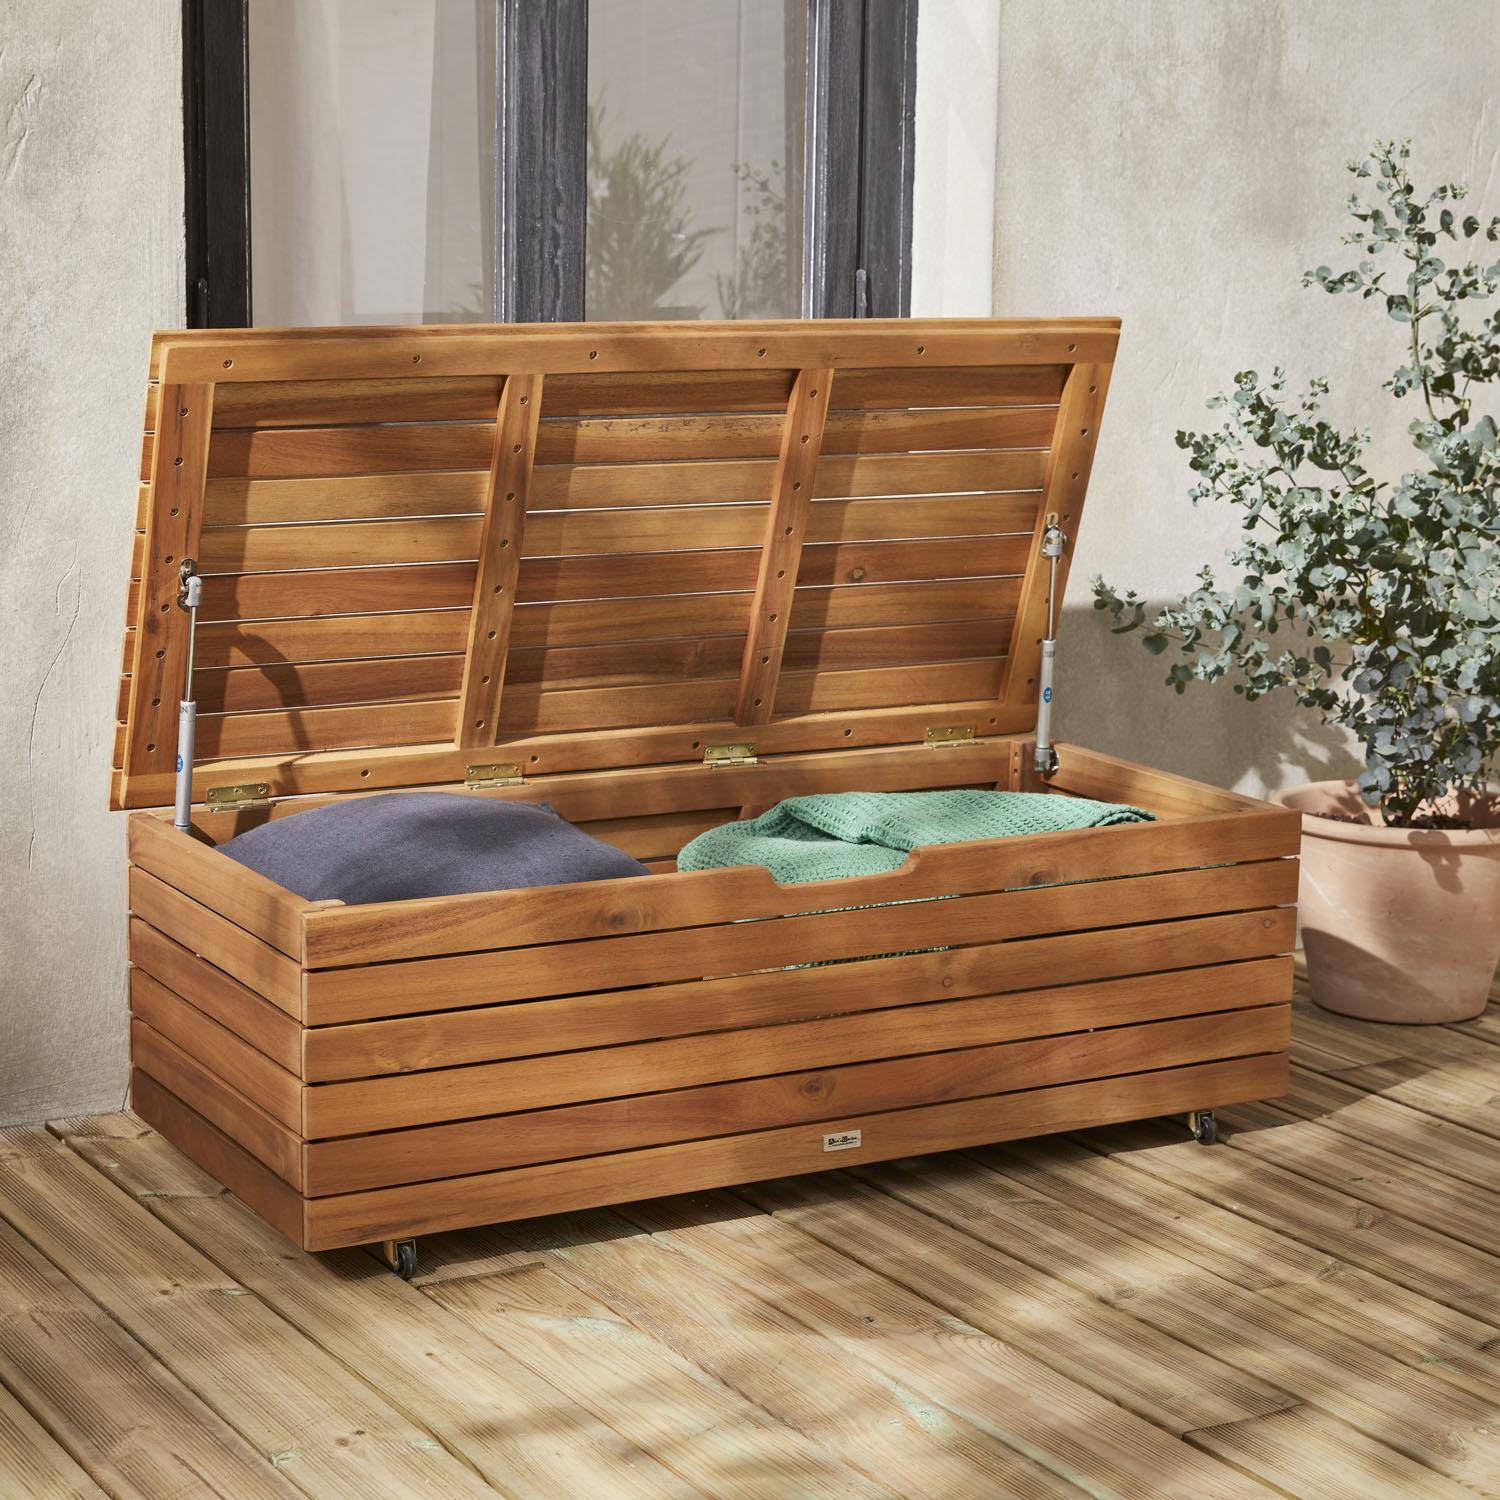 Garden storage box in wood - Saragosse - 110L, cushion storage, 107x48.5cm with hydraulic lift opening and casters Photo2